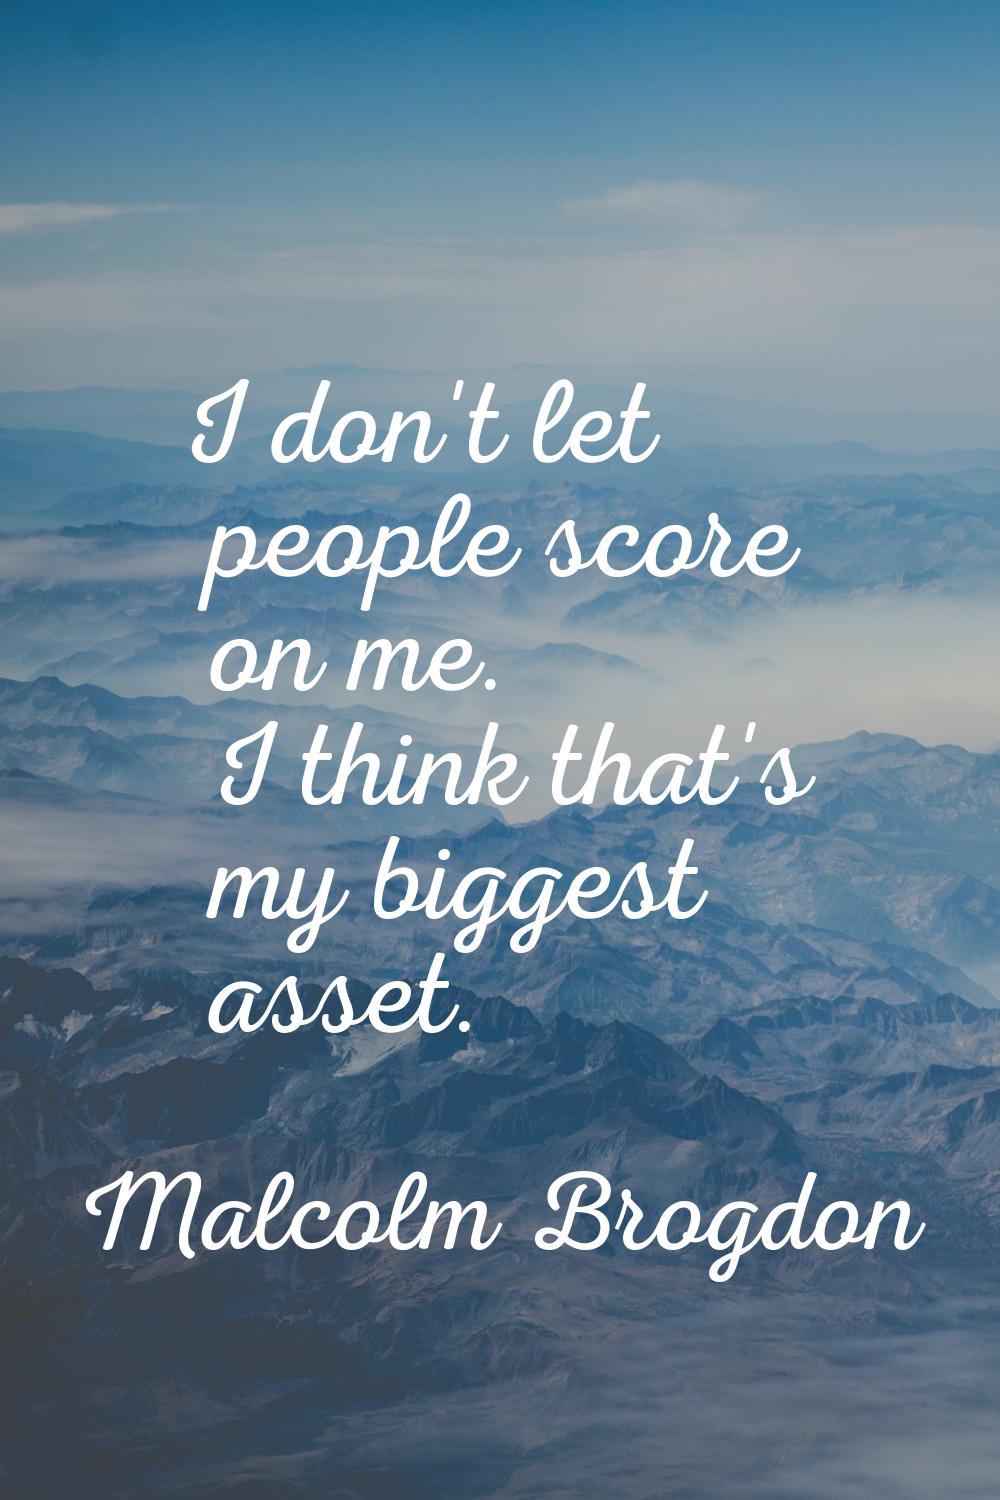 I don't let people score on me. I think that's my biggest asset.